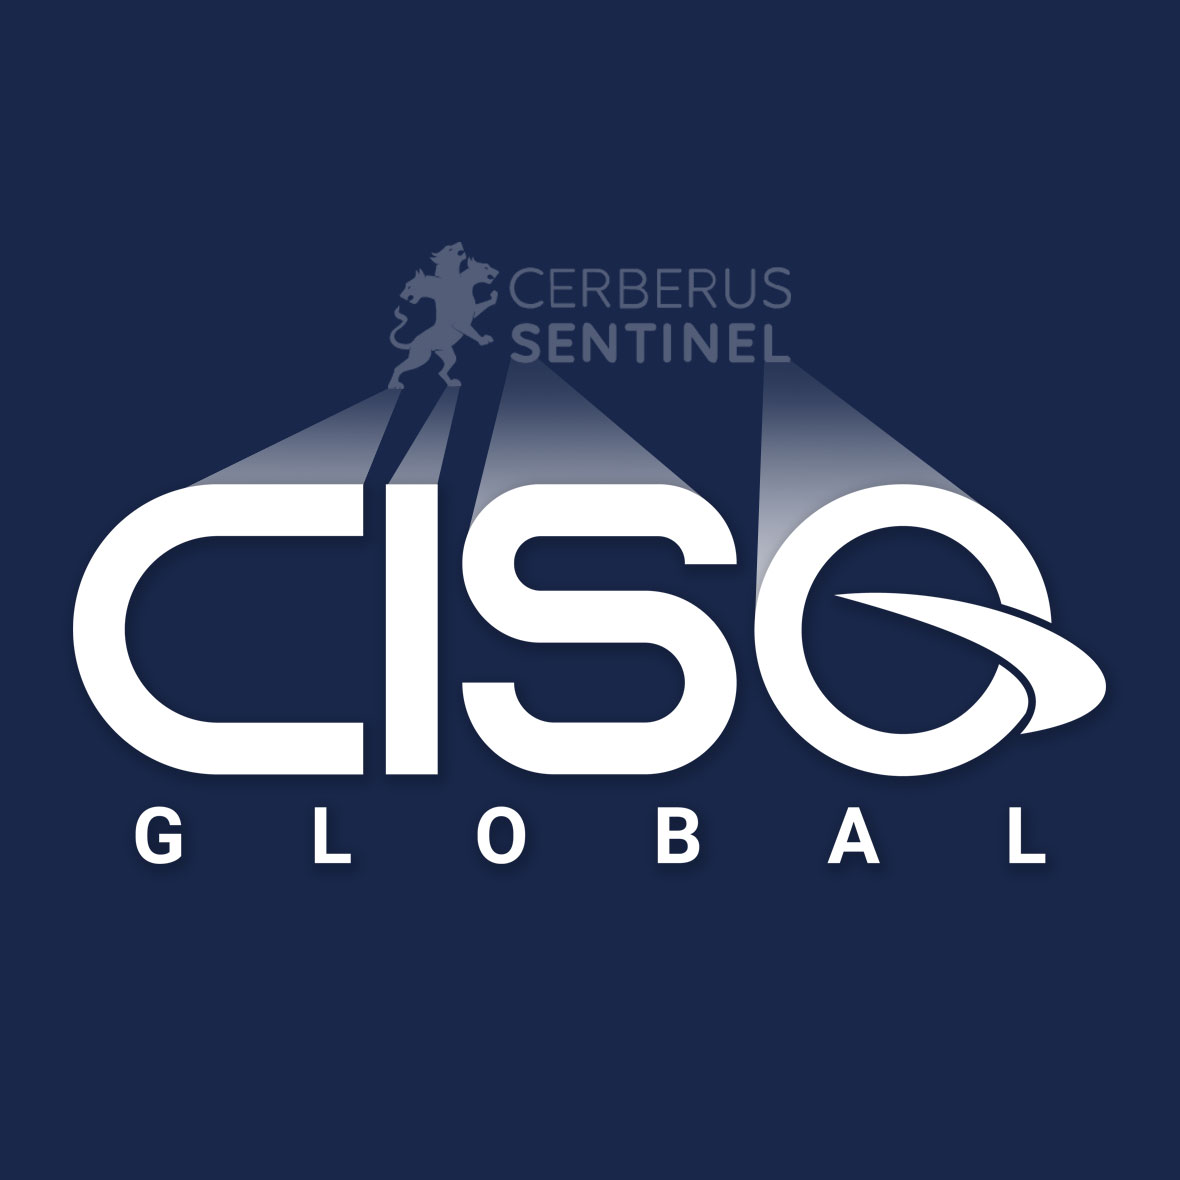 Cerberus Sentinel to become CISO Global, Inc.